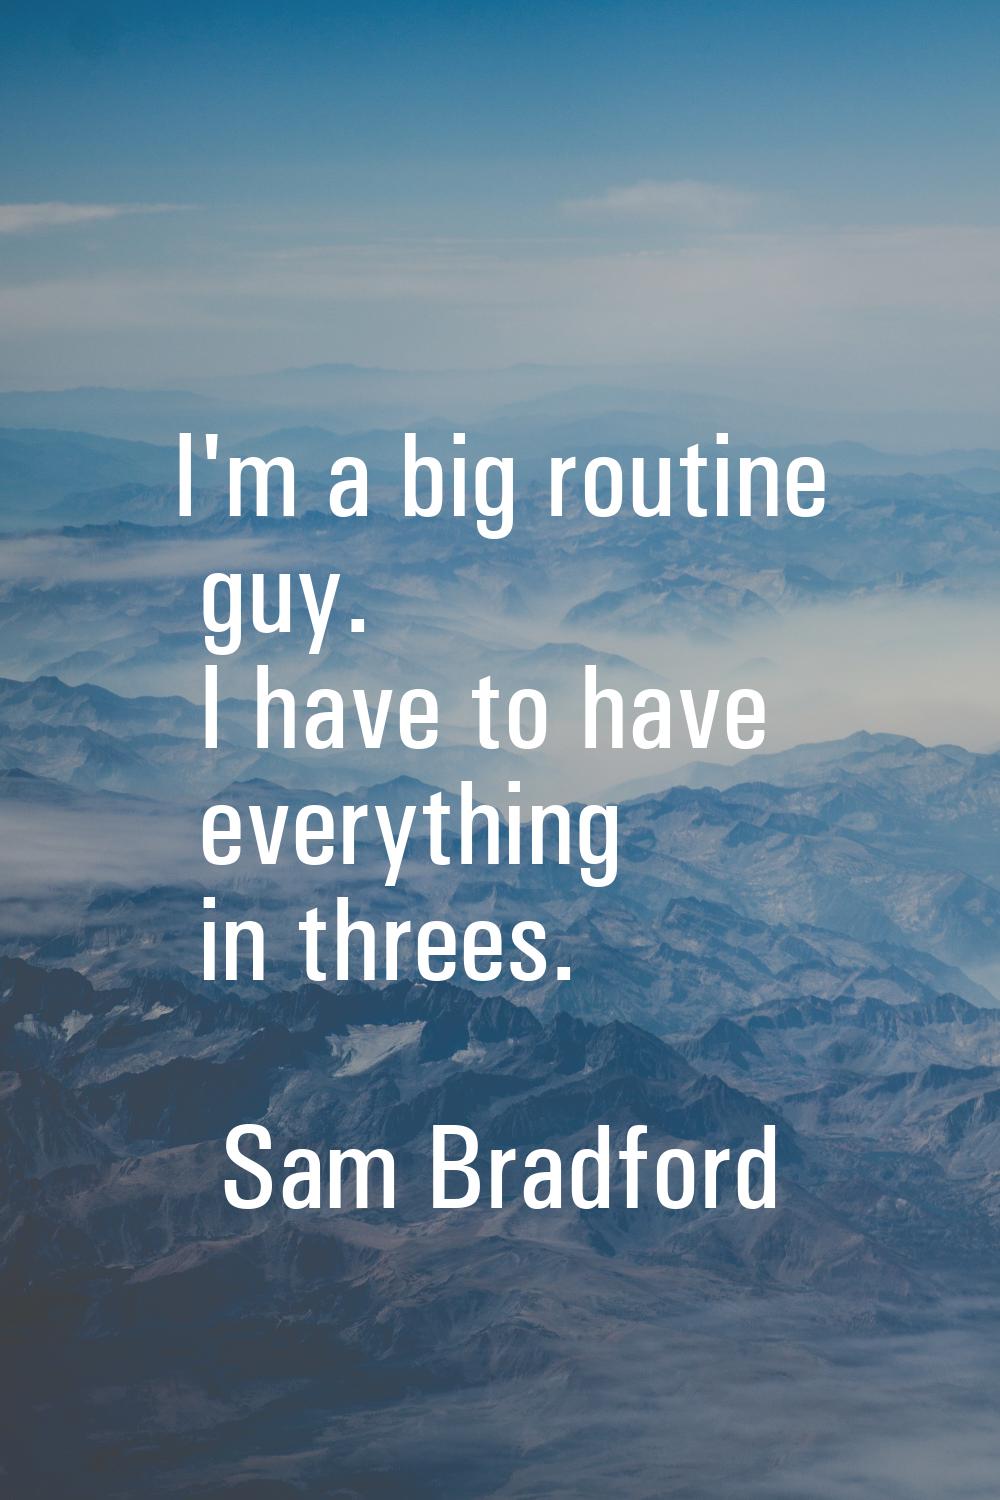 I'm a big routine guy. I have to have everything in threes.